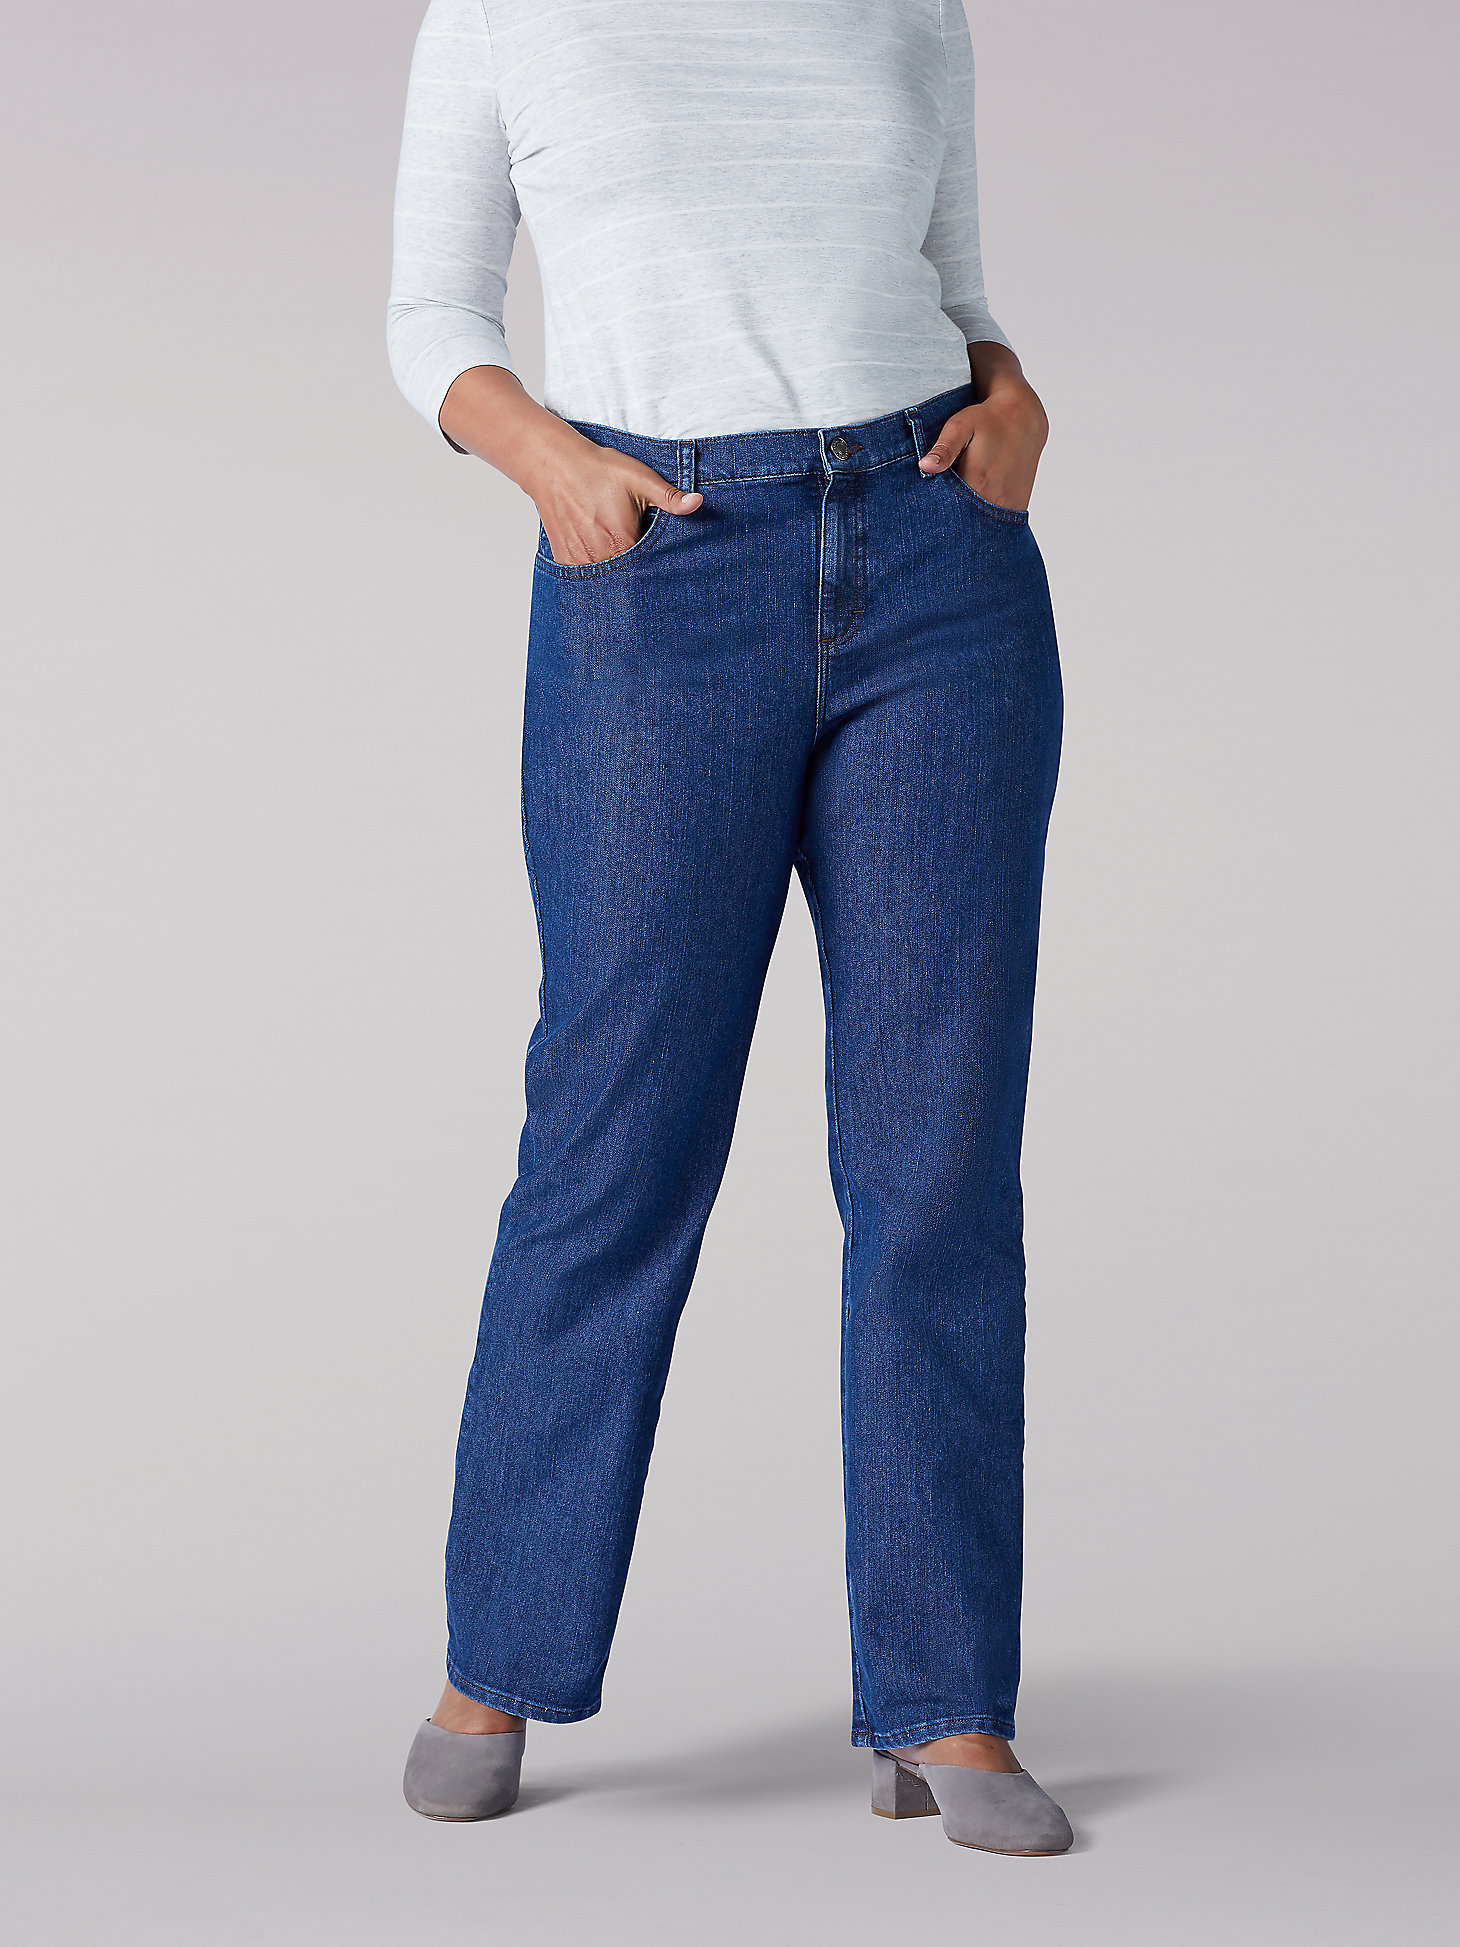 Women’s Original Relaxed Fit Straight Leg Jeans (Plus) in Premium Rinse main view